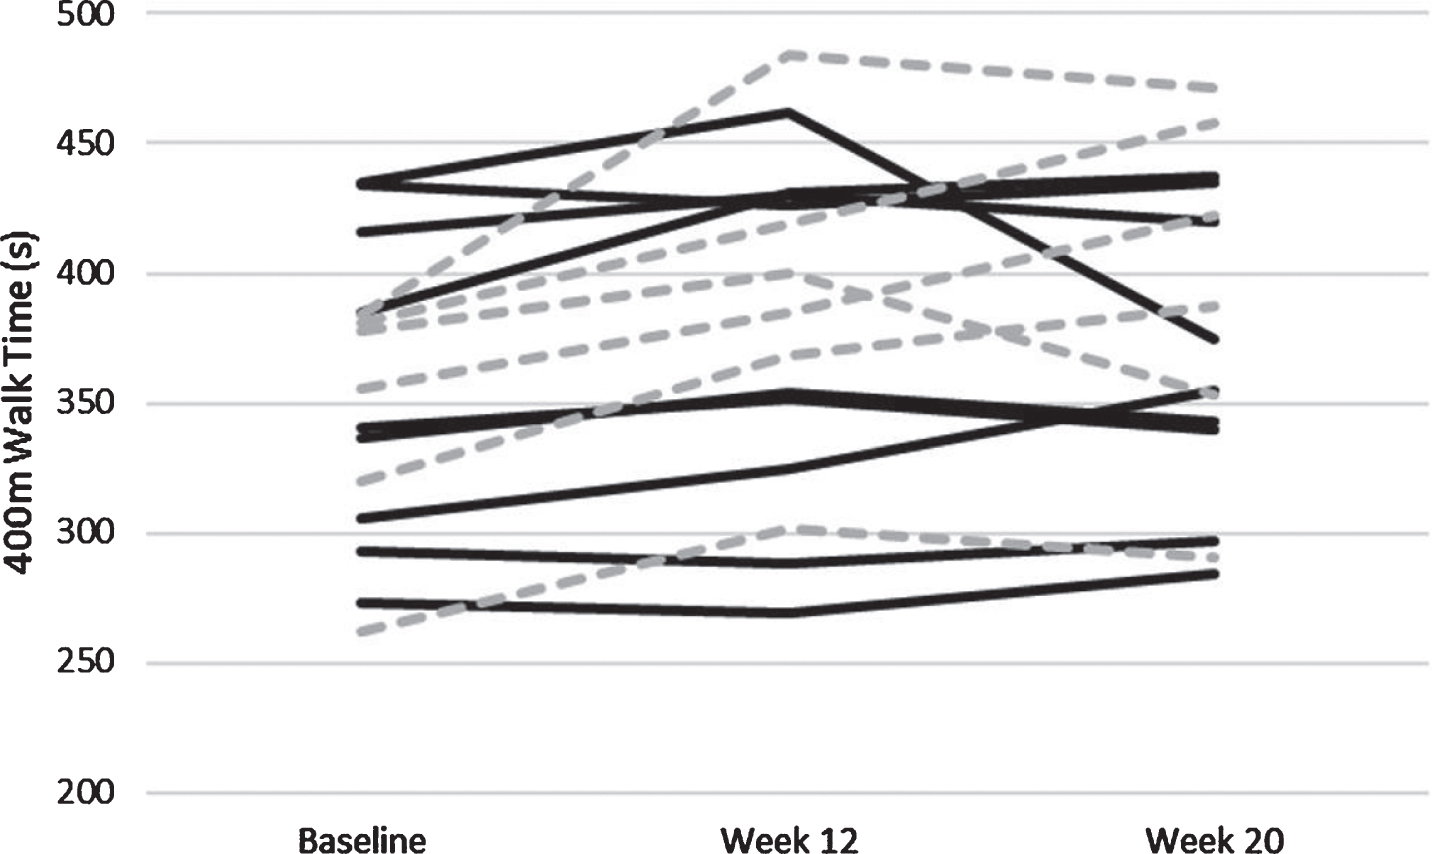 Individually plotted time course of 400 m walk time in seconds. Individuals who were apart of the Aerobic Exercise paradigm are solid black lines, and those apart of the control paradigm are hashed grey lines.